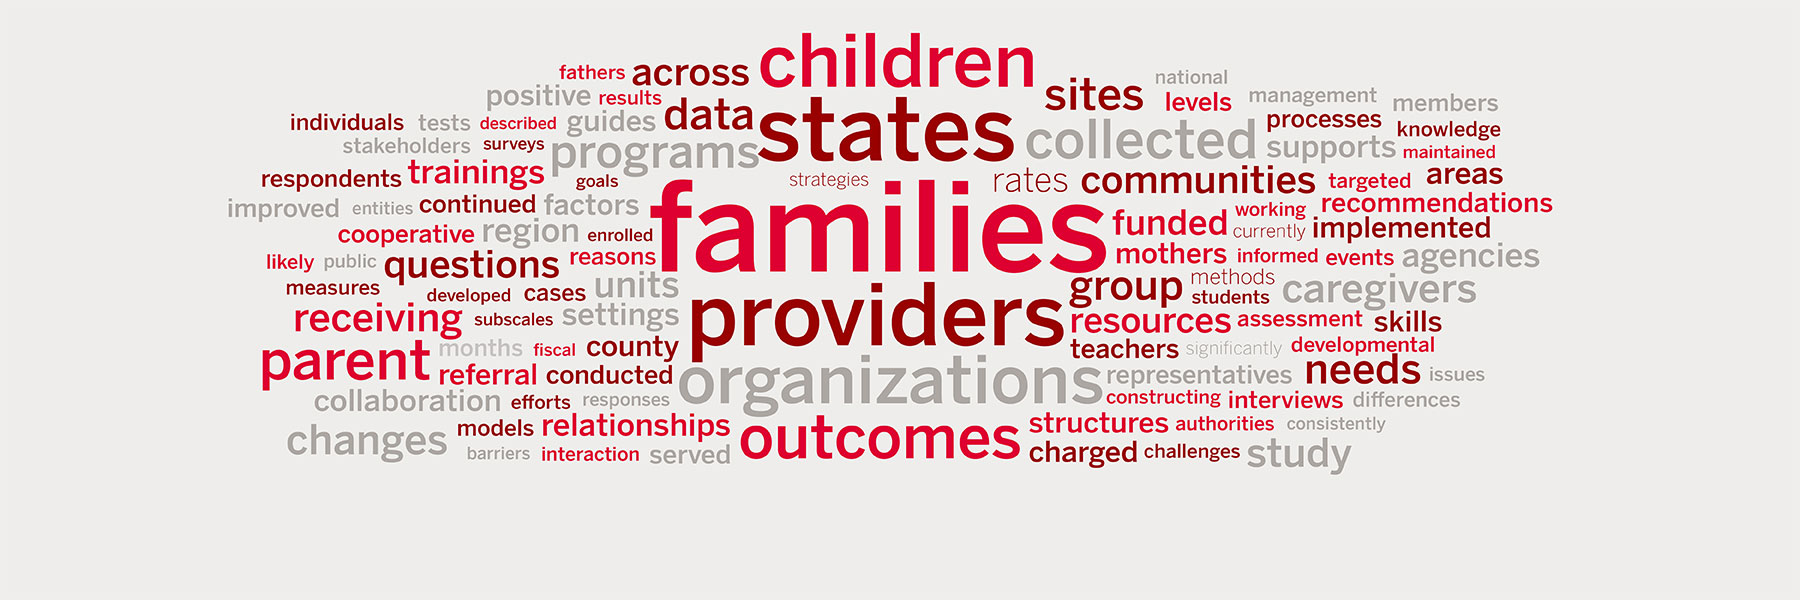  A word cloud with the word families in the biggest font in the center surrounded by medium-sized words children, states, providers, organizations, and outcomes. Other smaller words surrounding these words are data, sites, communities, questions, parent, group, resources, needs, structures, relationships, trainings, study, needs, caregivers, agencies, changes, and receiving. 